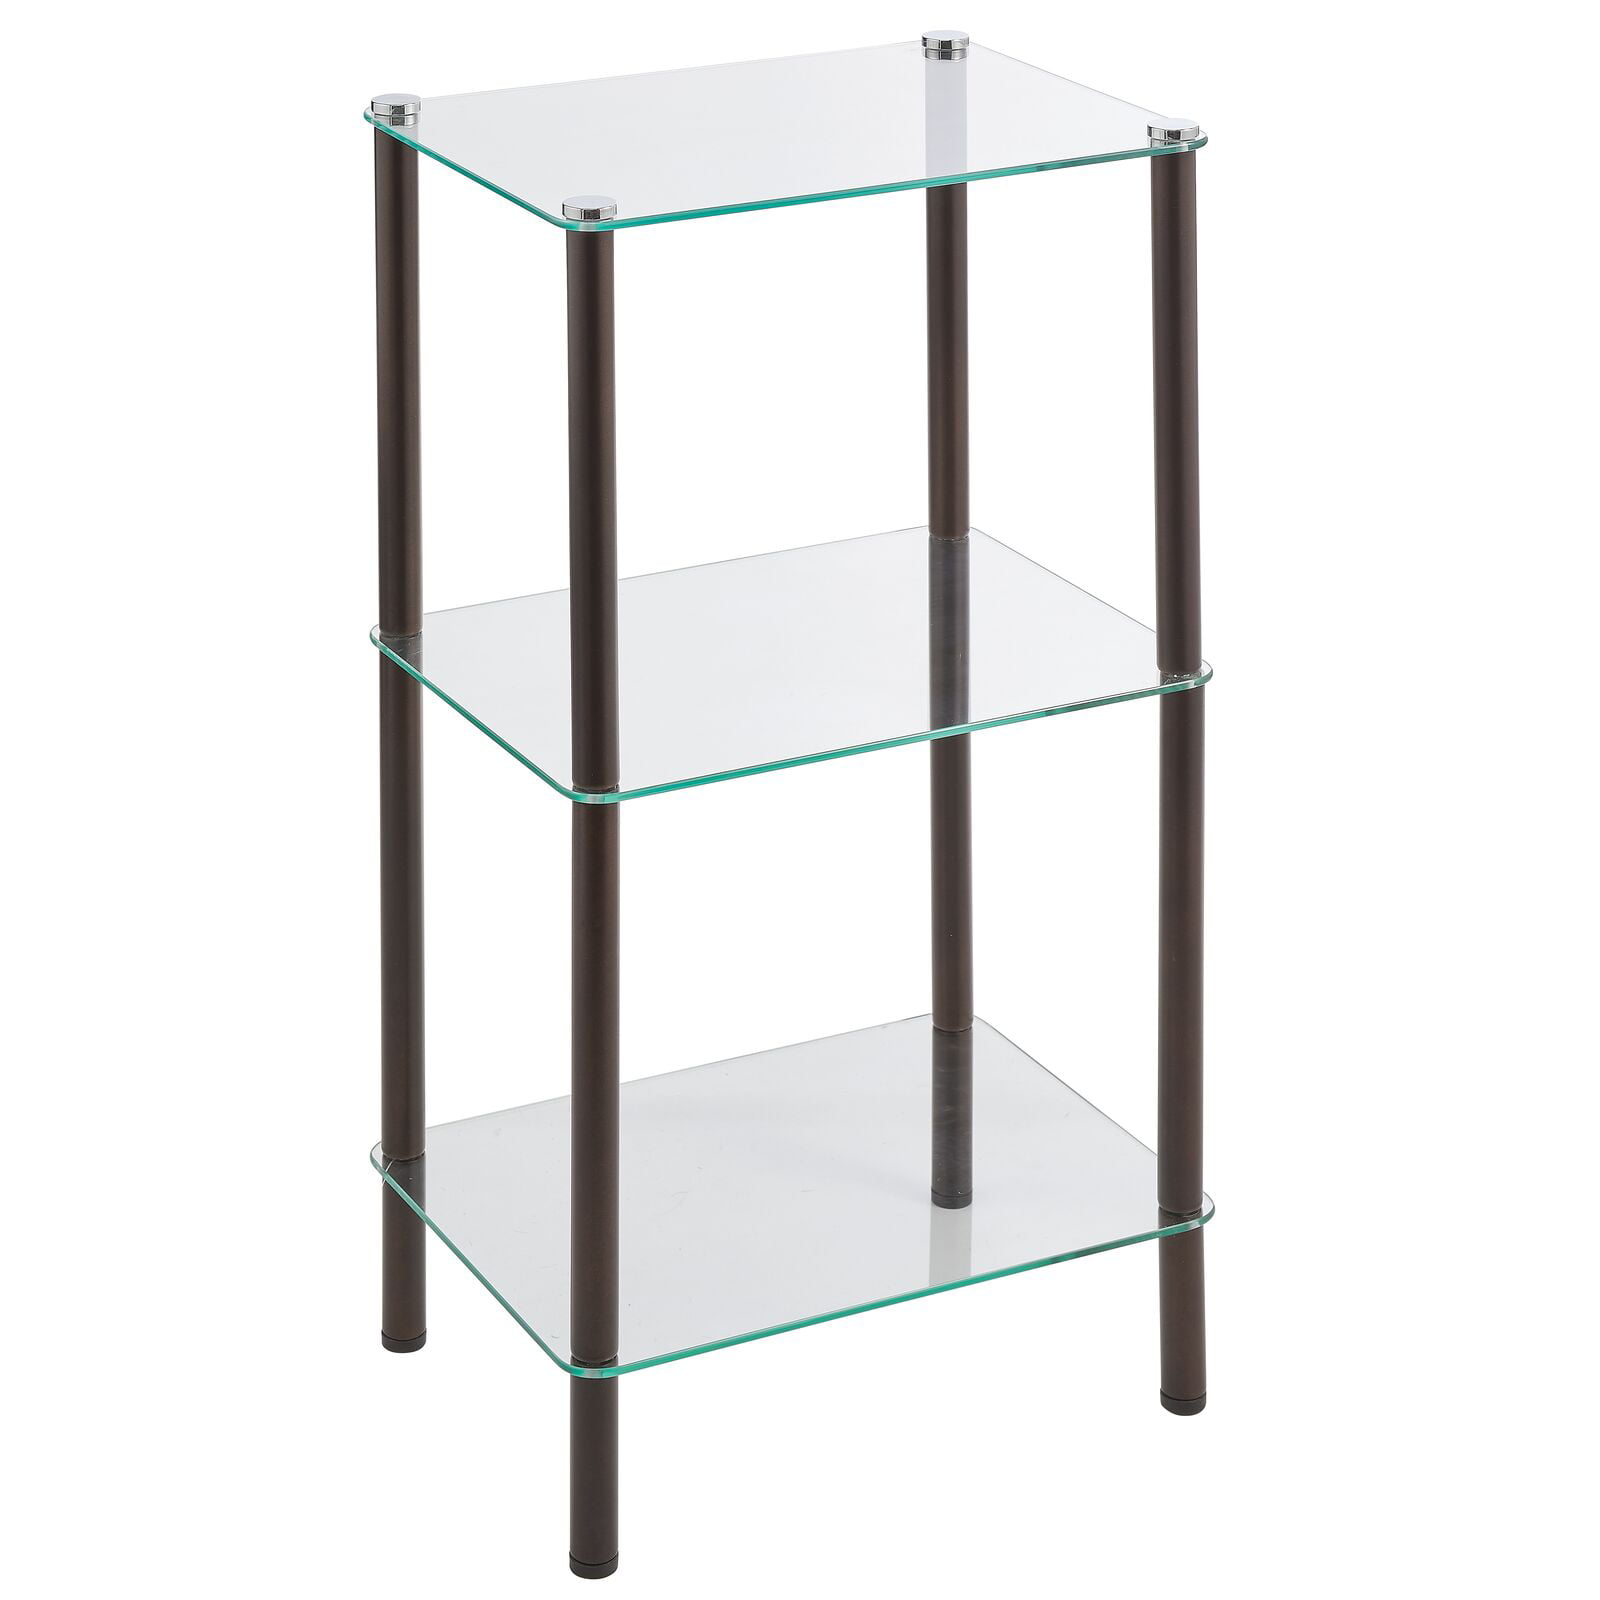 mDesign Home Floor Storage Rectangular Tower, 3 Tier Open Glass Shelves -  Compact Shelving Display Unit - Multi-Use Home Organizer for Bath, Office,  